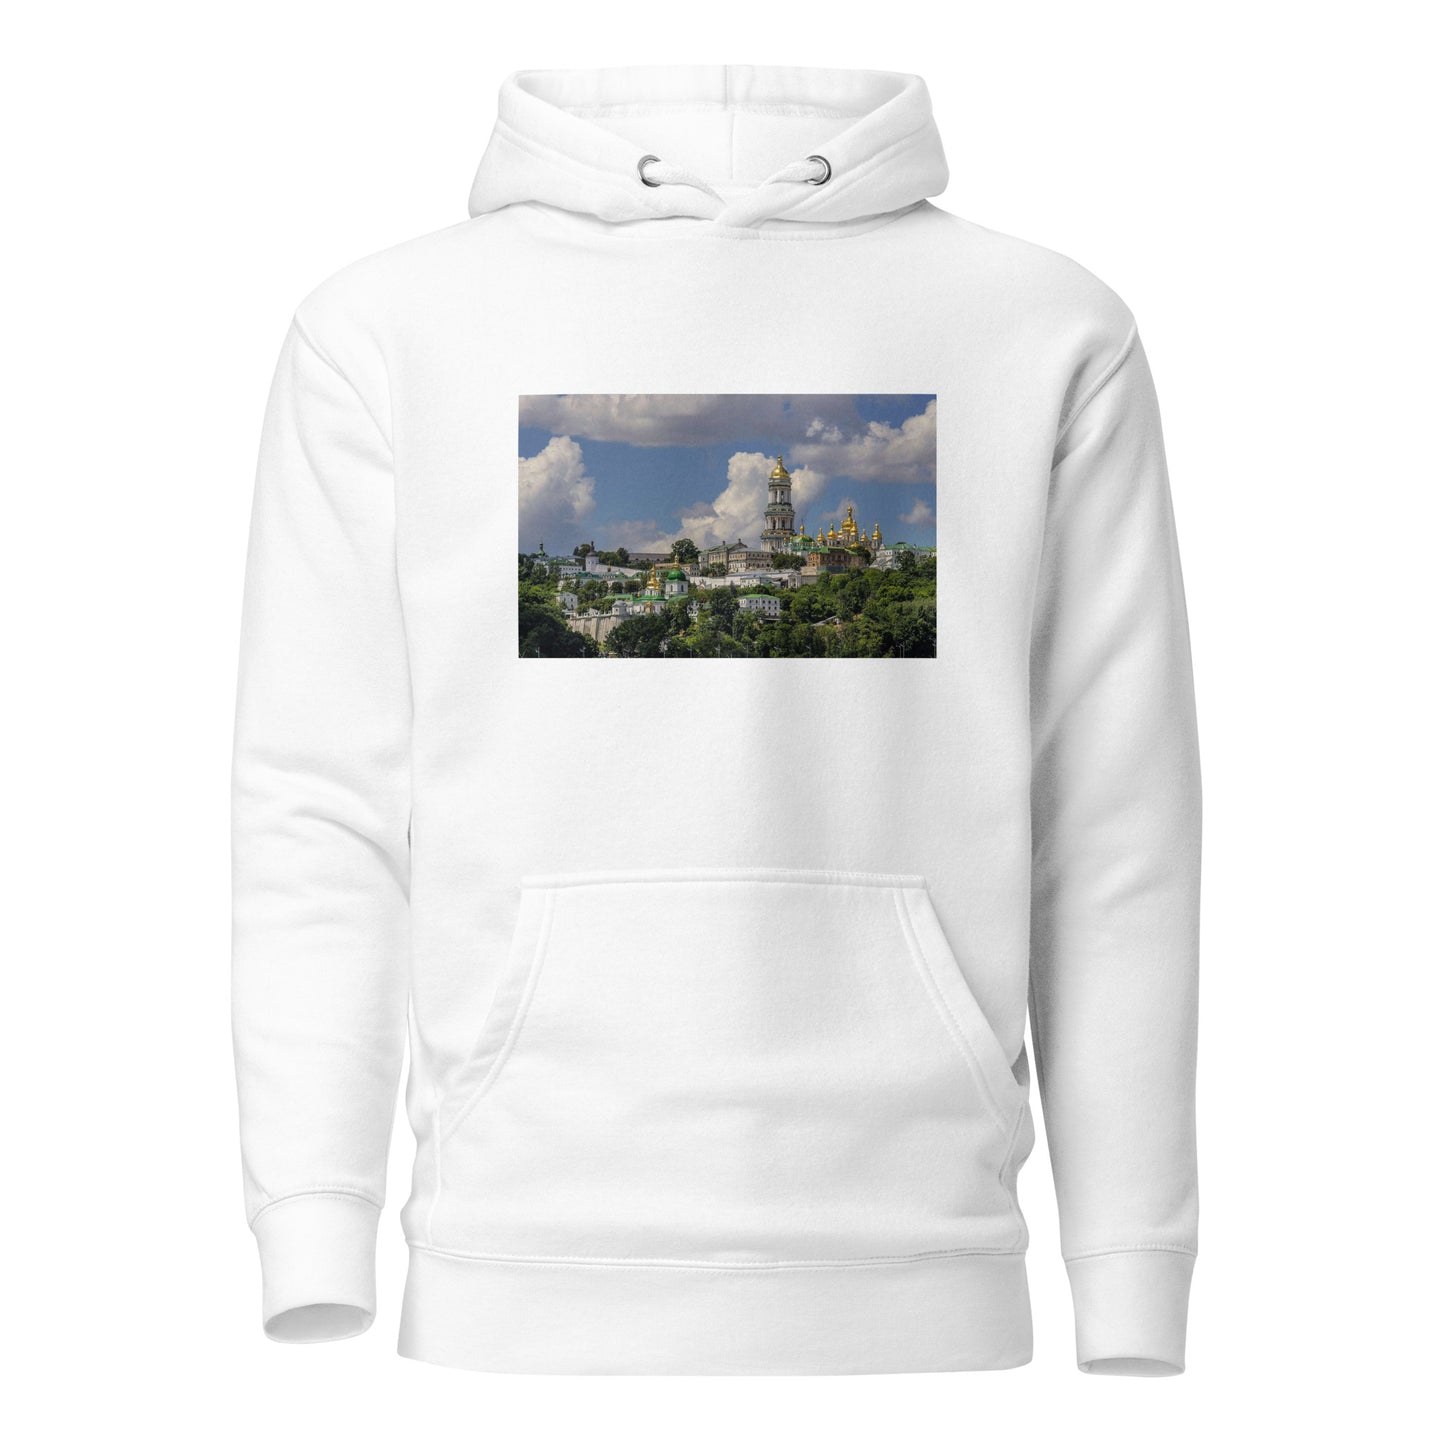 Hoodie with Lavra